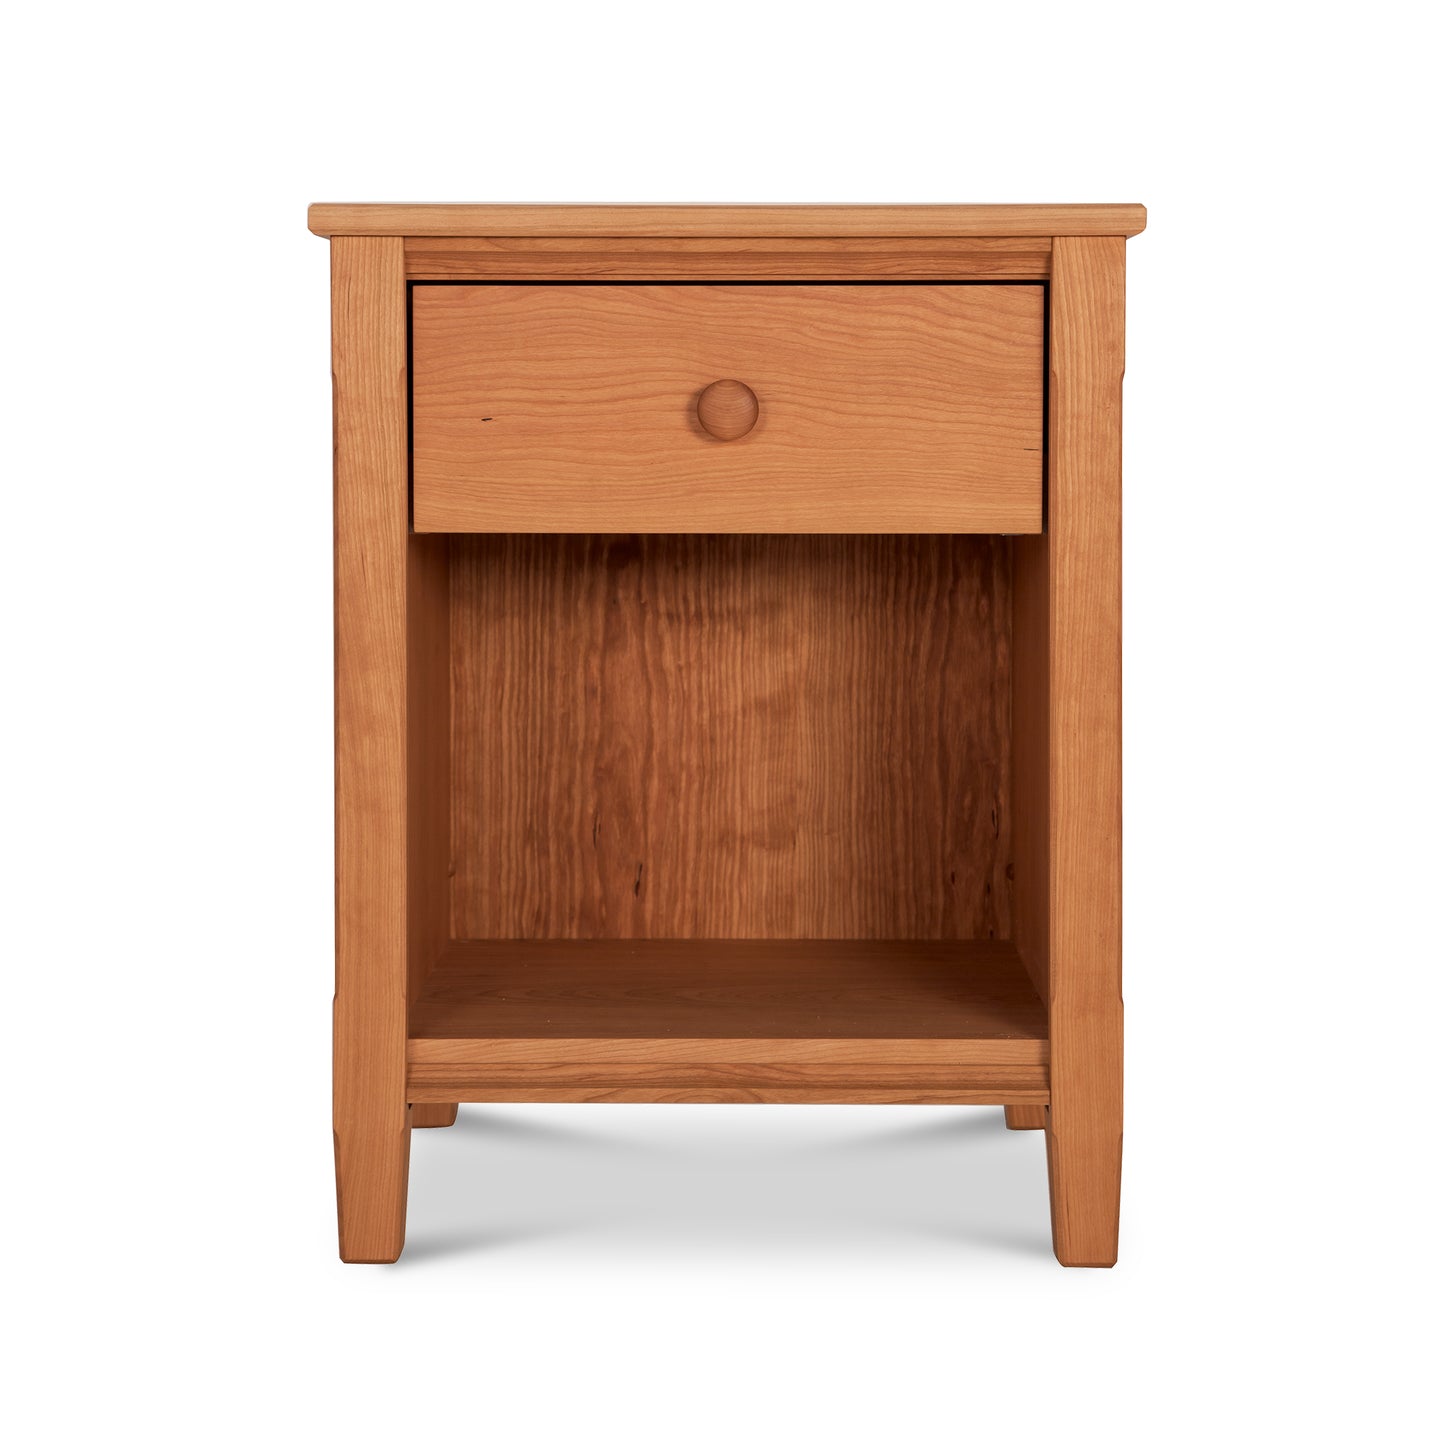 A small Maple Corner Woodworks Vermont Shaker 1-Drawer Enclosed Shelf Nightstand crafted with natural hardwoods, featuring a drawer.